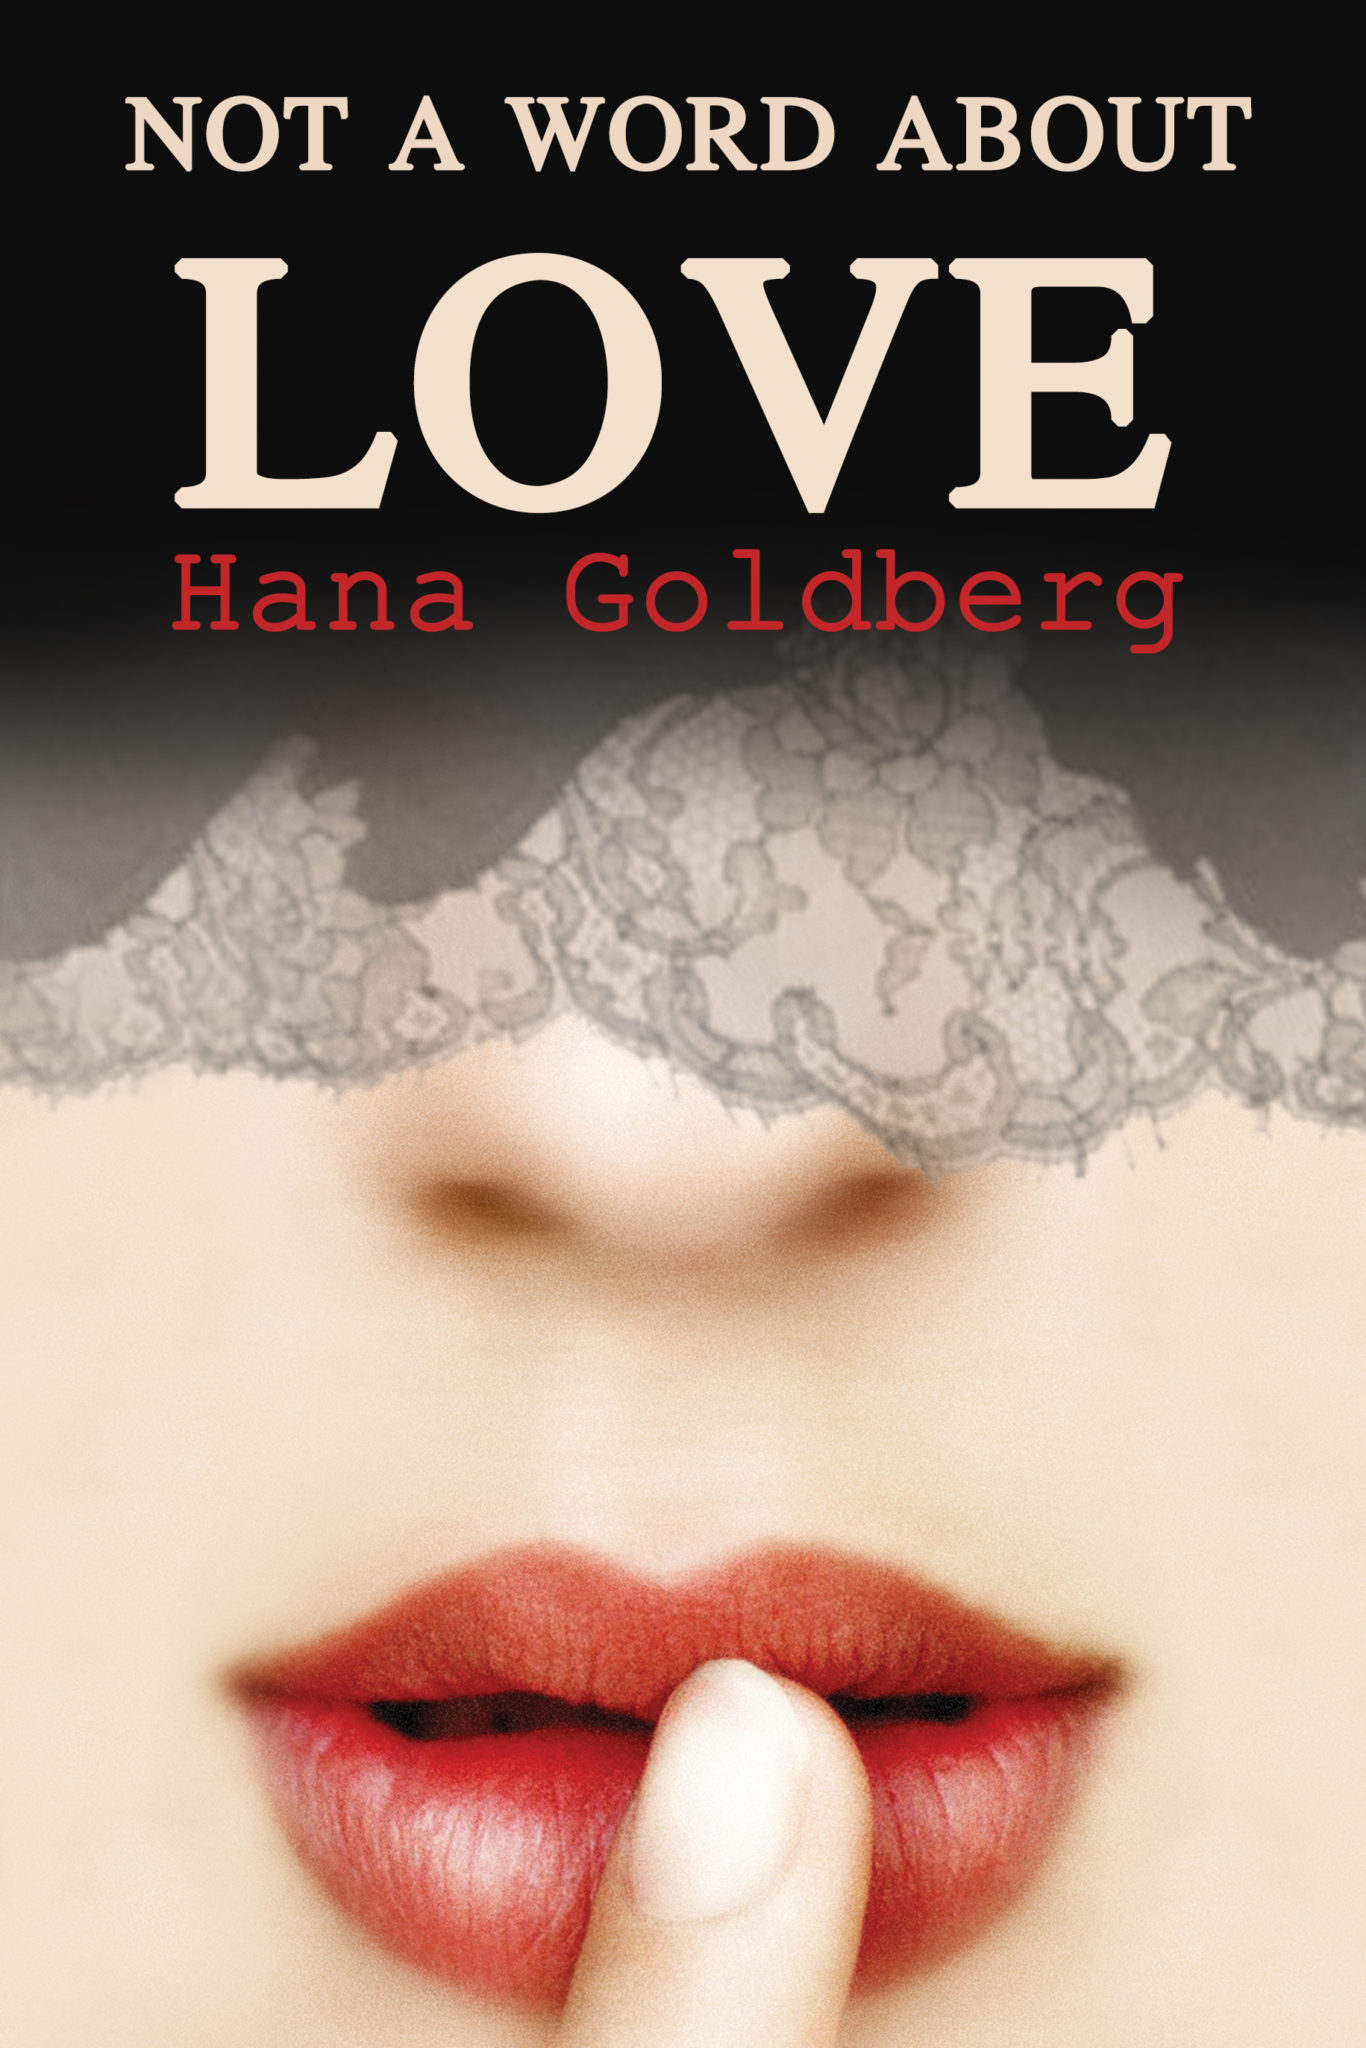 FREE: Not a Word About Love by Hana Goldberg